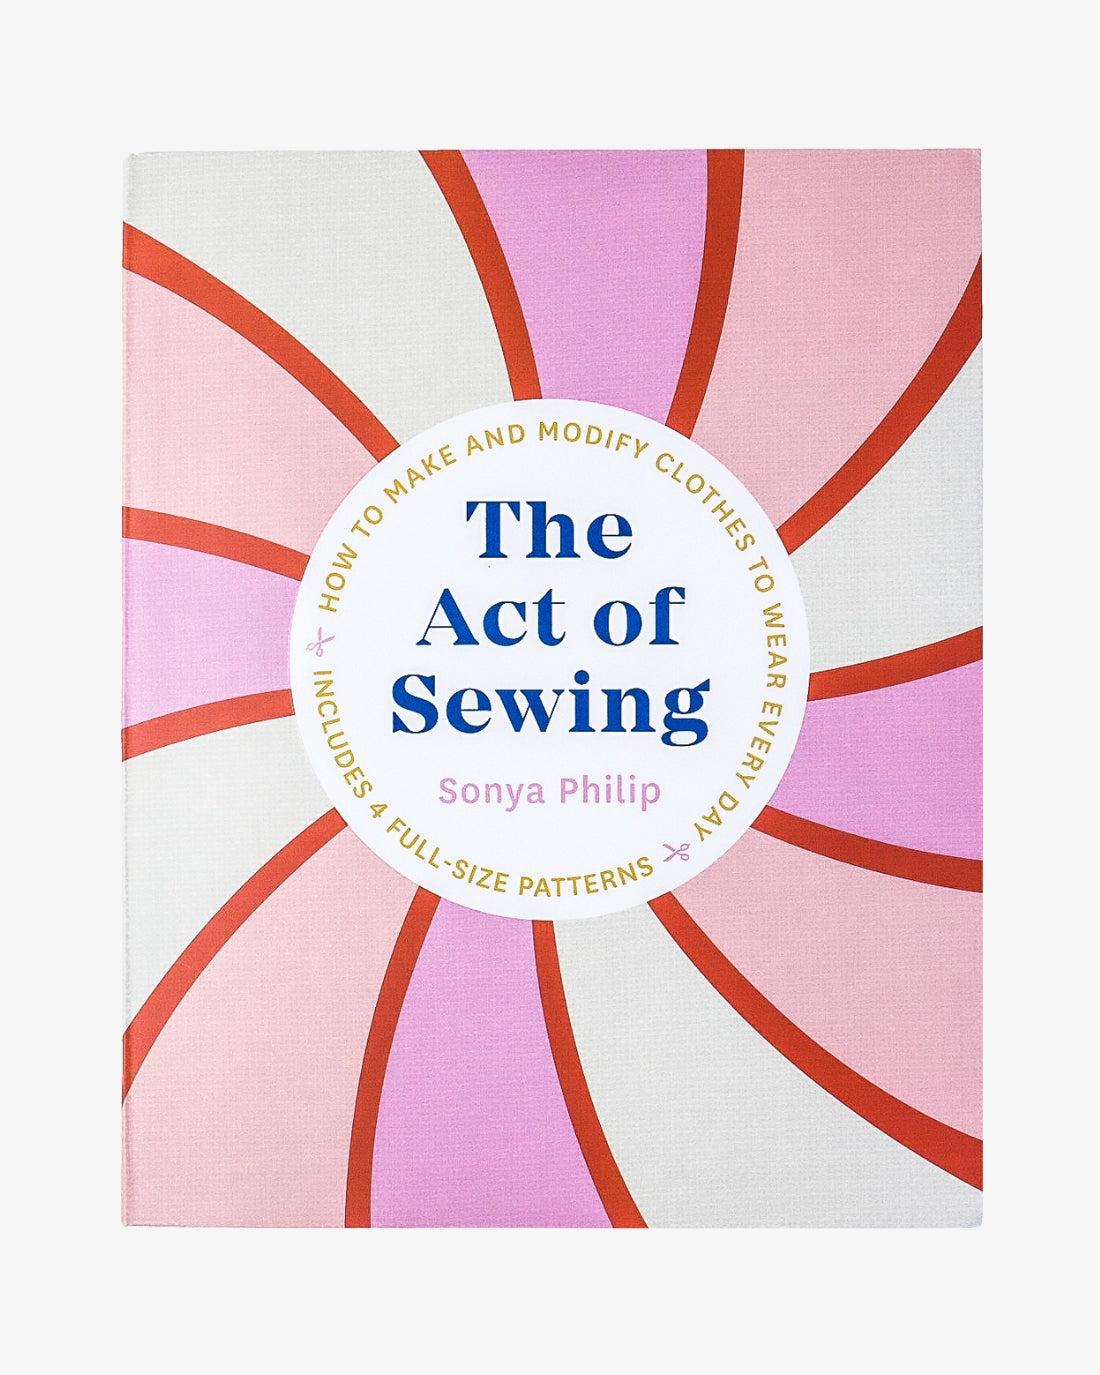 The Act of Sewing: How to Make and Modify Clothes to Wear Every Day by Sonya Philip